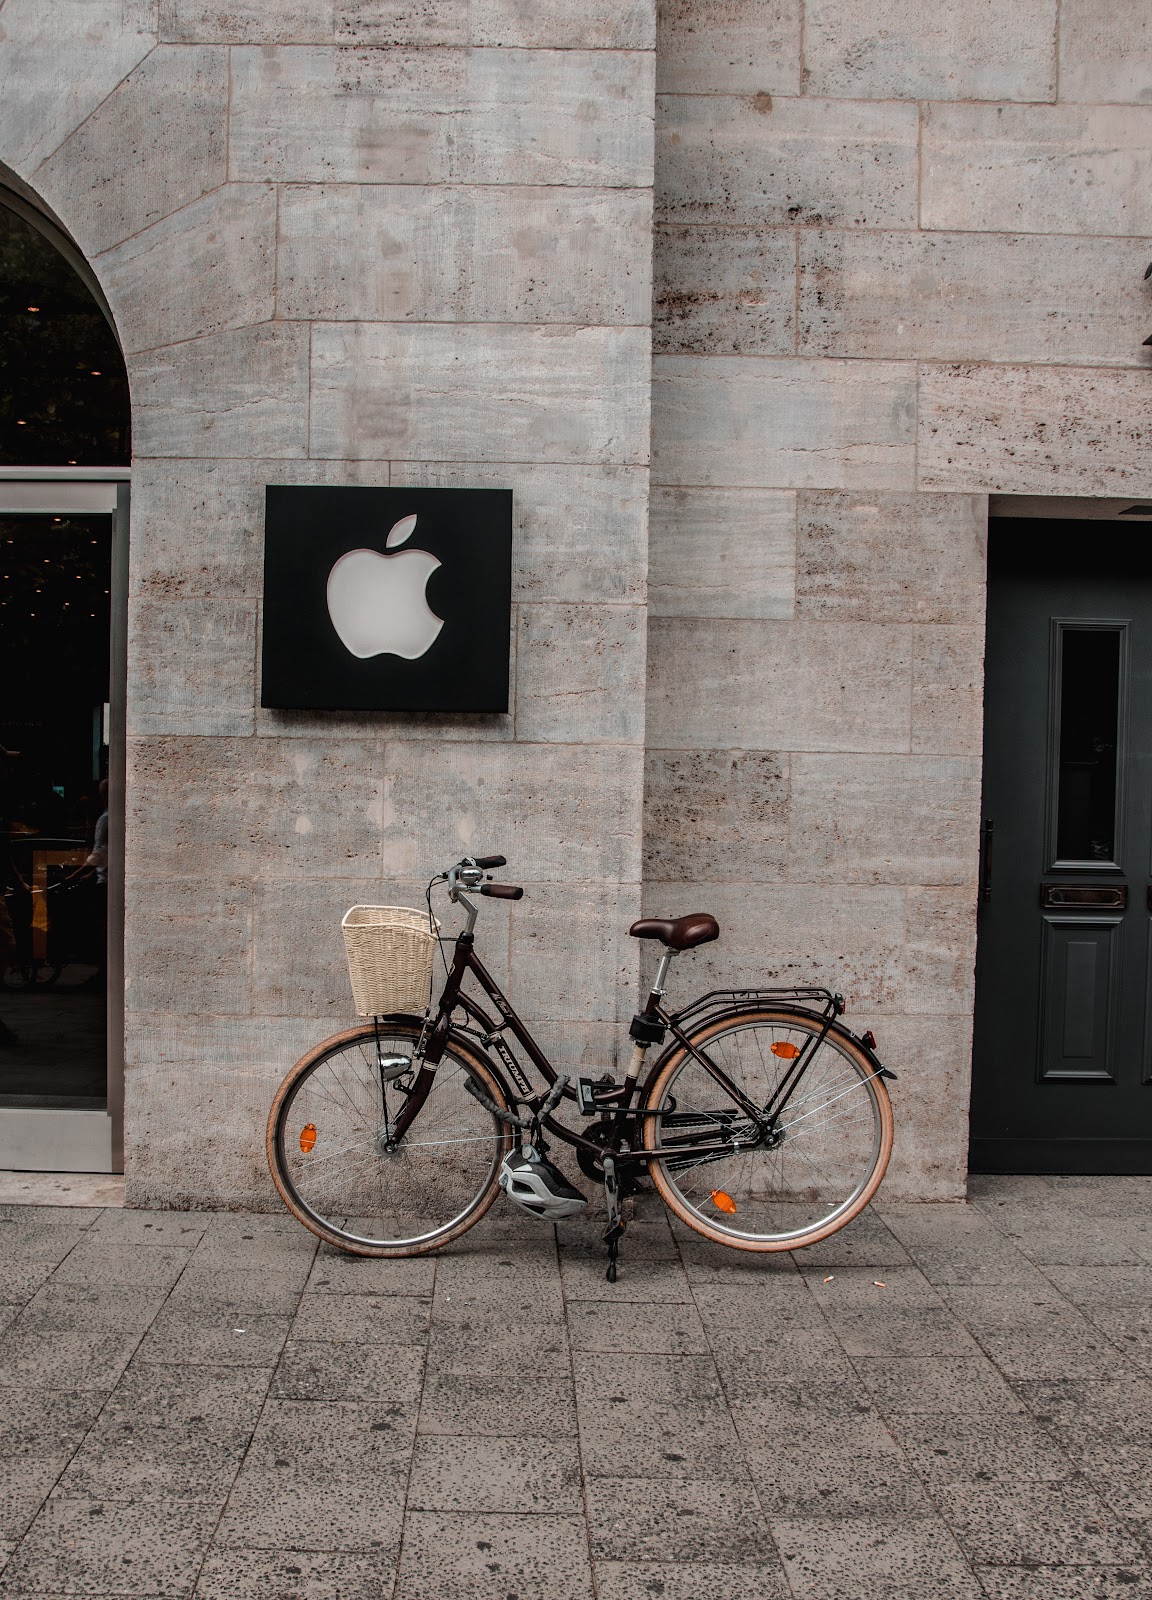 Apple logo over a bicycle on the street